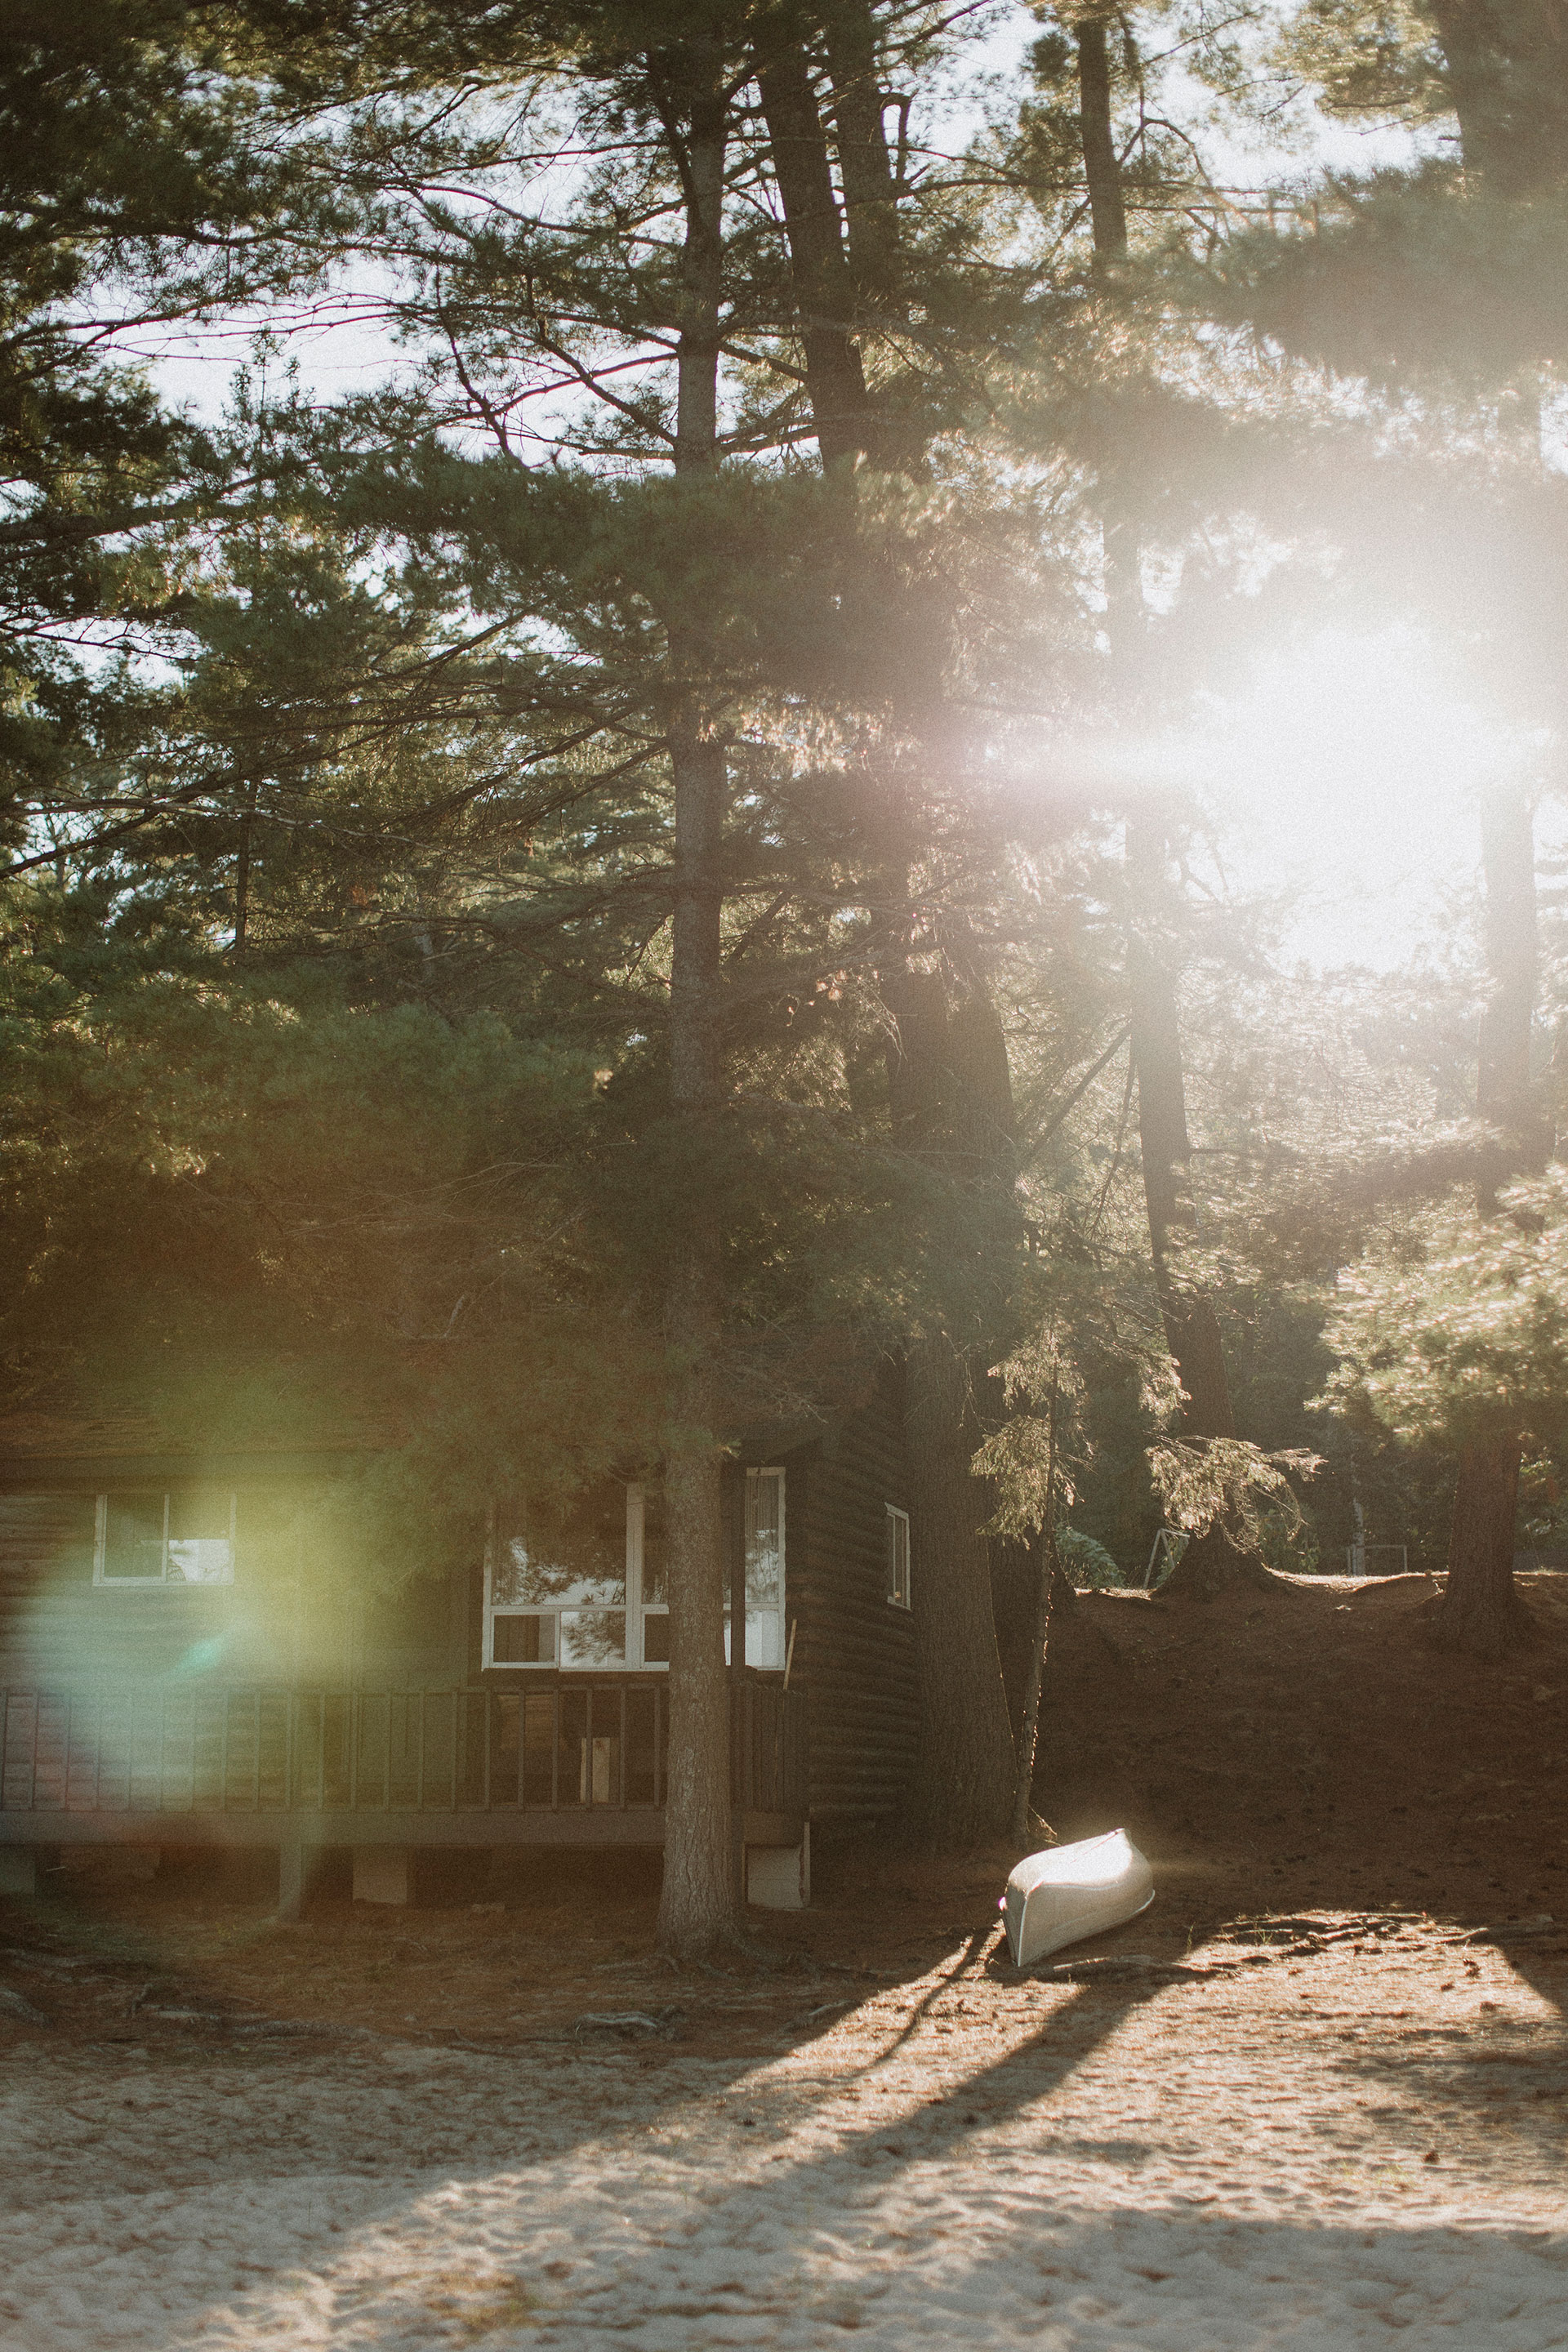 sun shines through trees by a rustic cabin with beached canoe